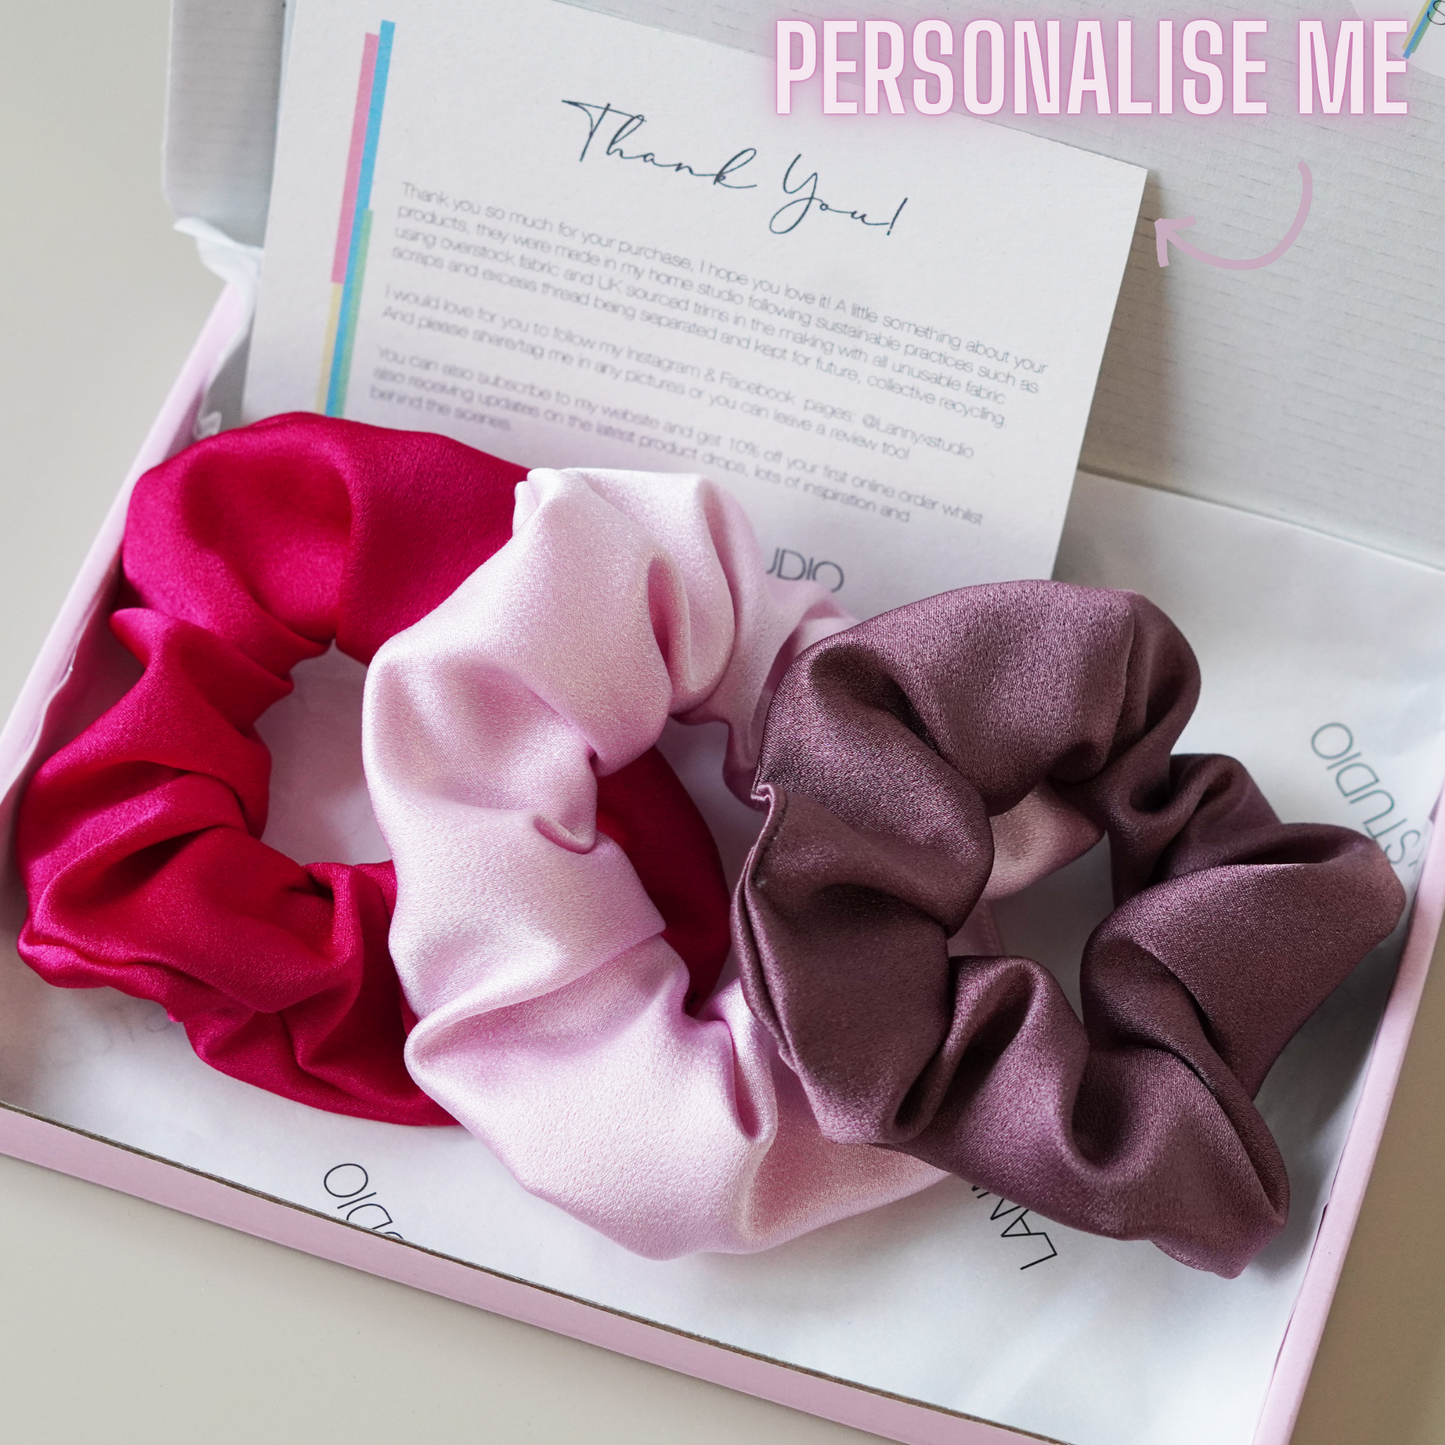 Fuchsia, Pink and Purple Satin collection in pink gift box, branded tissue paper and personalised note with neon text.